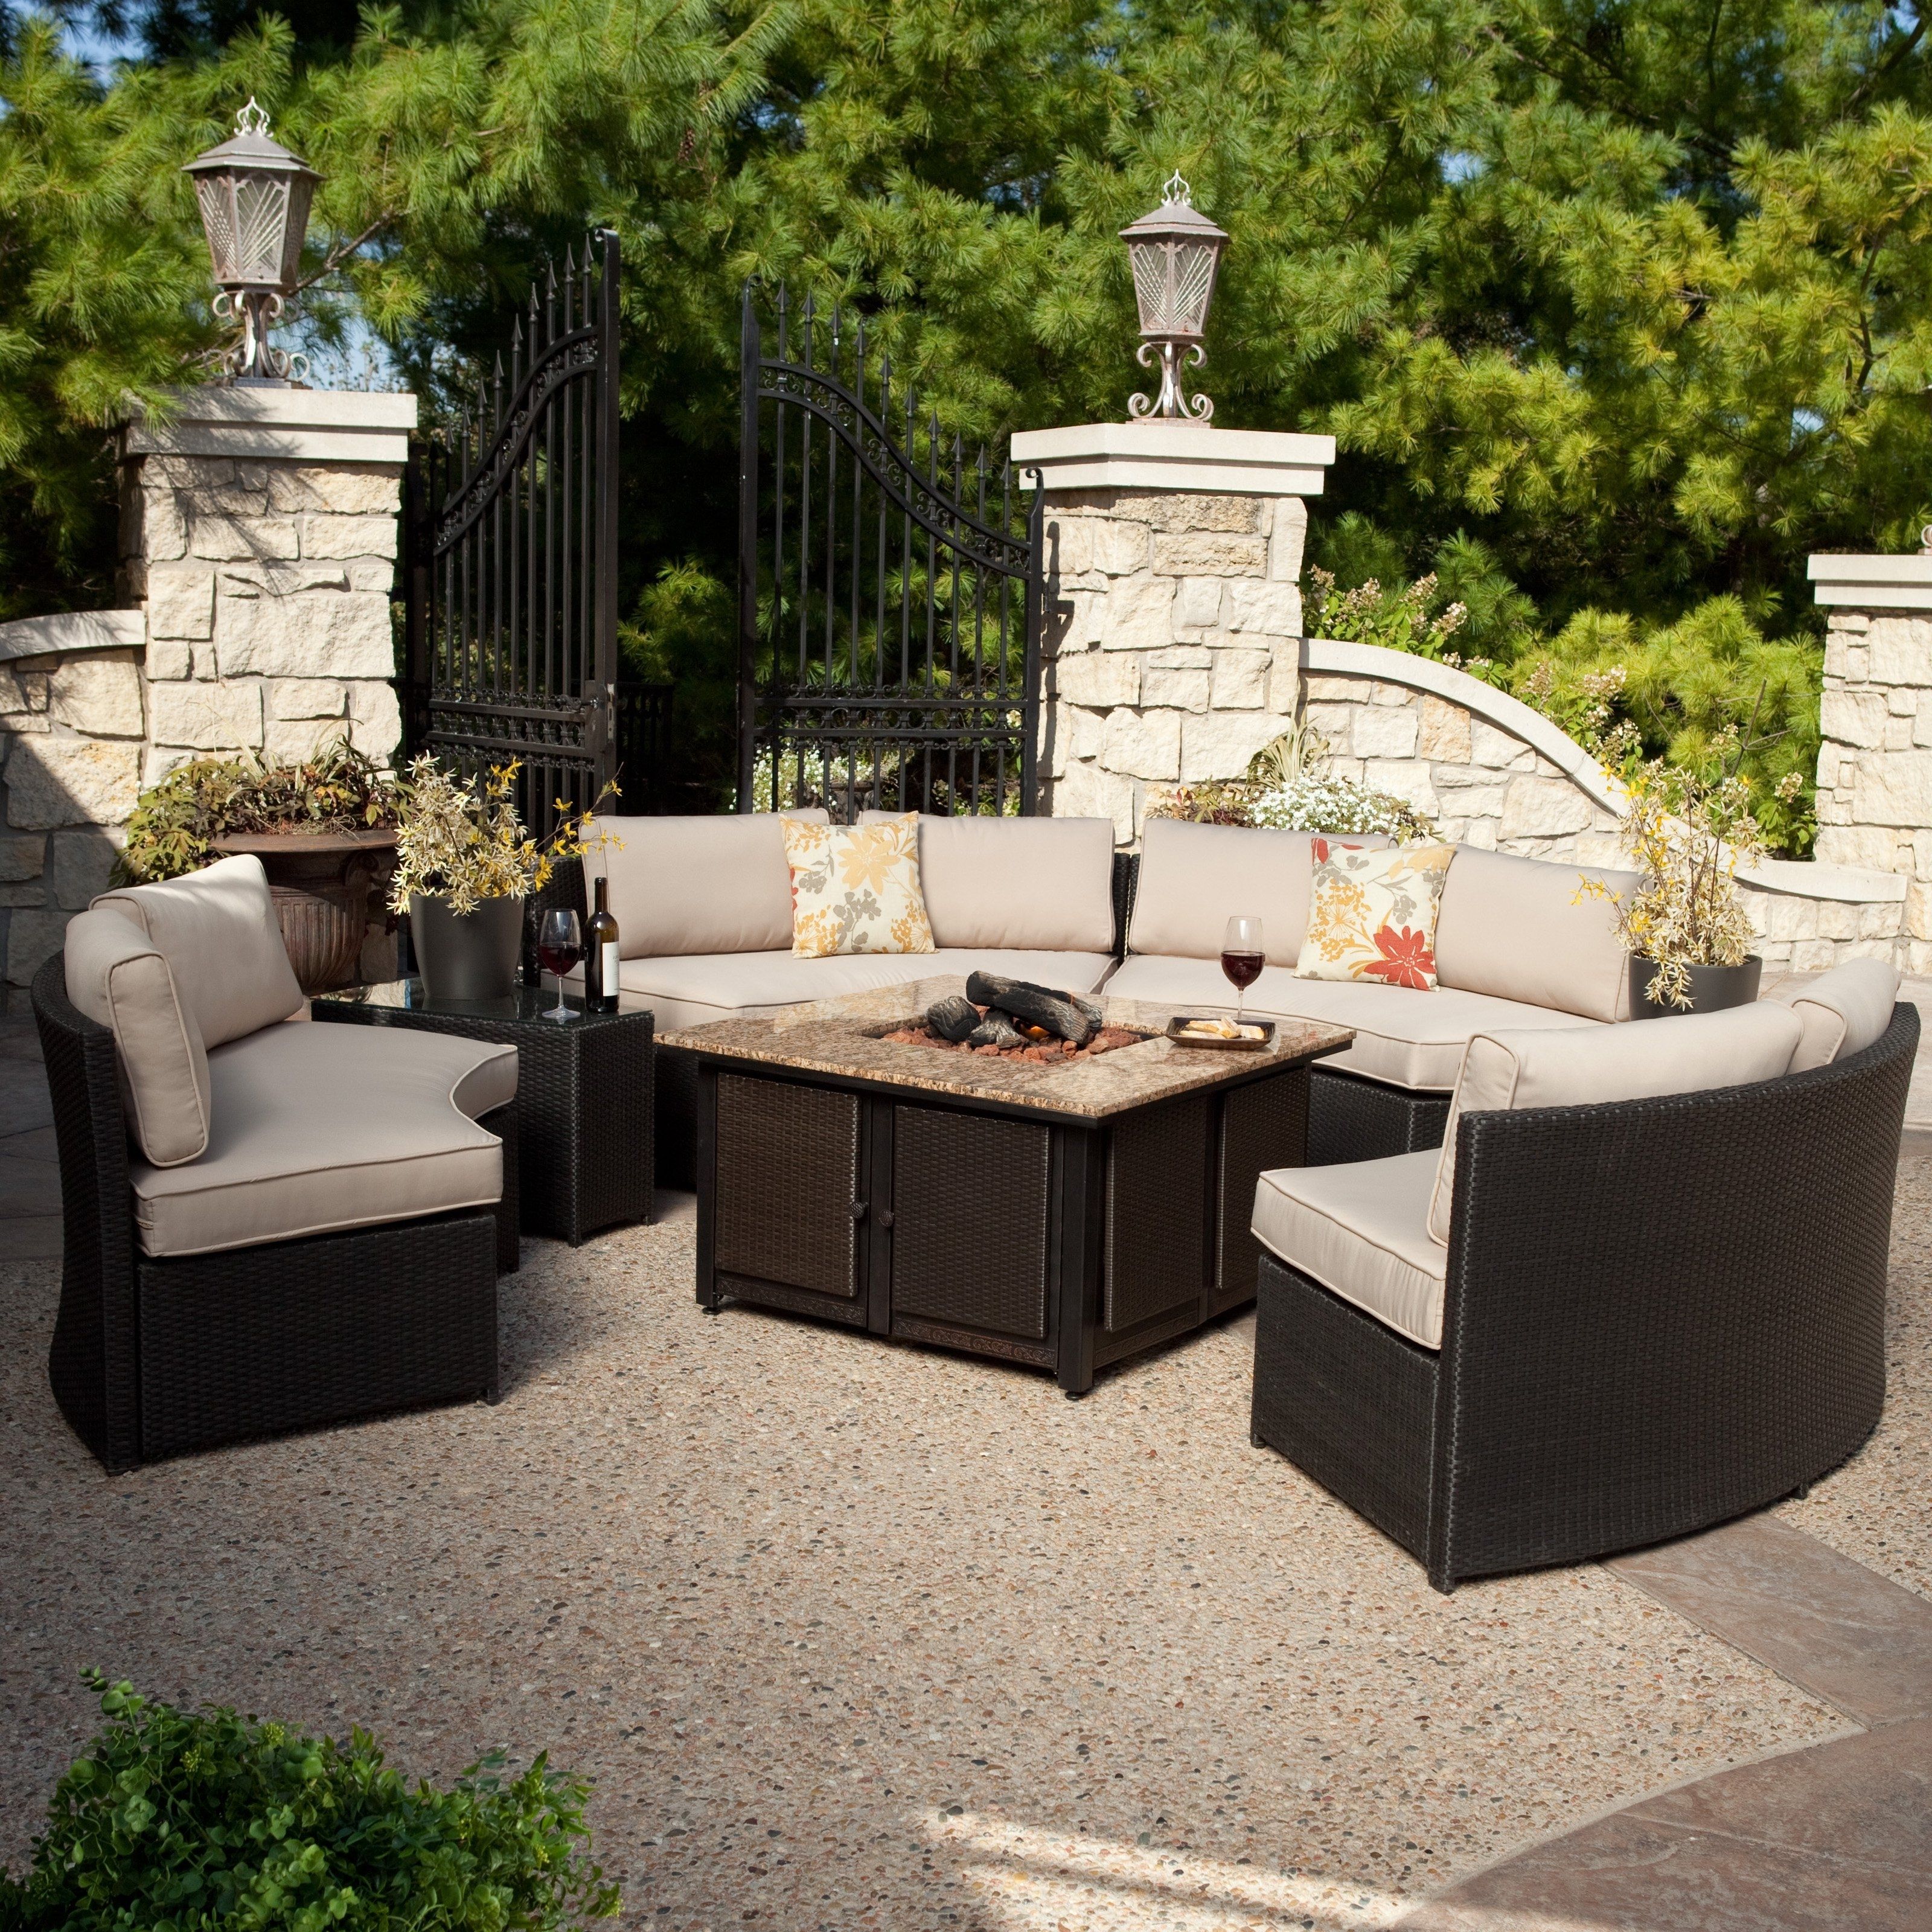 Favorite Beautiful Fire Pit Conversation Sets Patio Tall Stone Seating Around With Regard To Patio Conversation Sets With Propane Fire Pit (View 1 of 20)